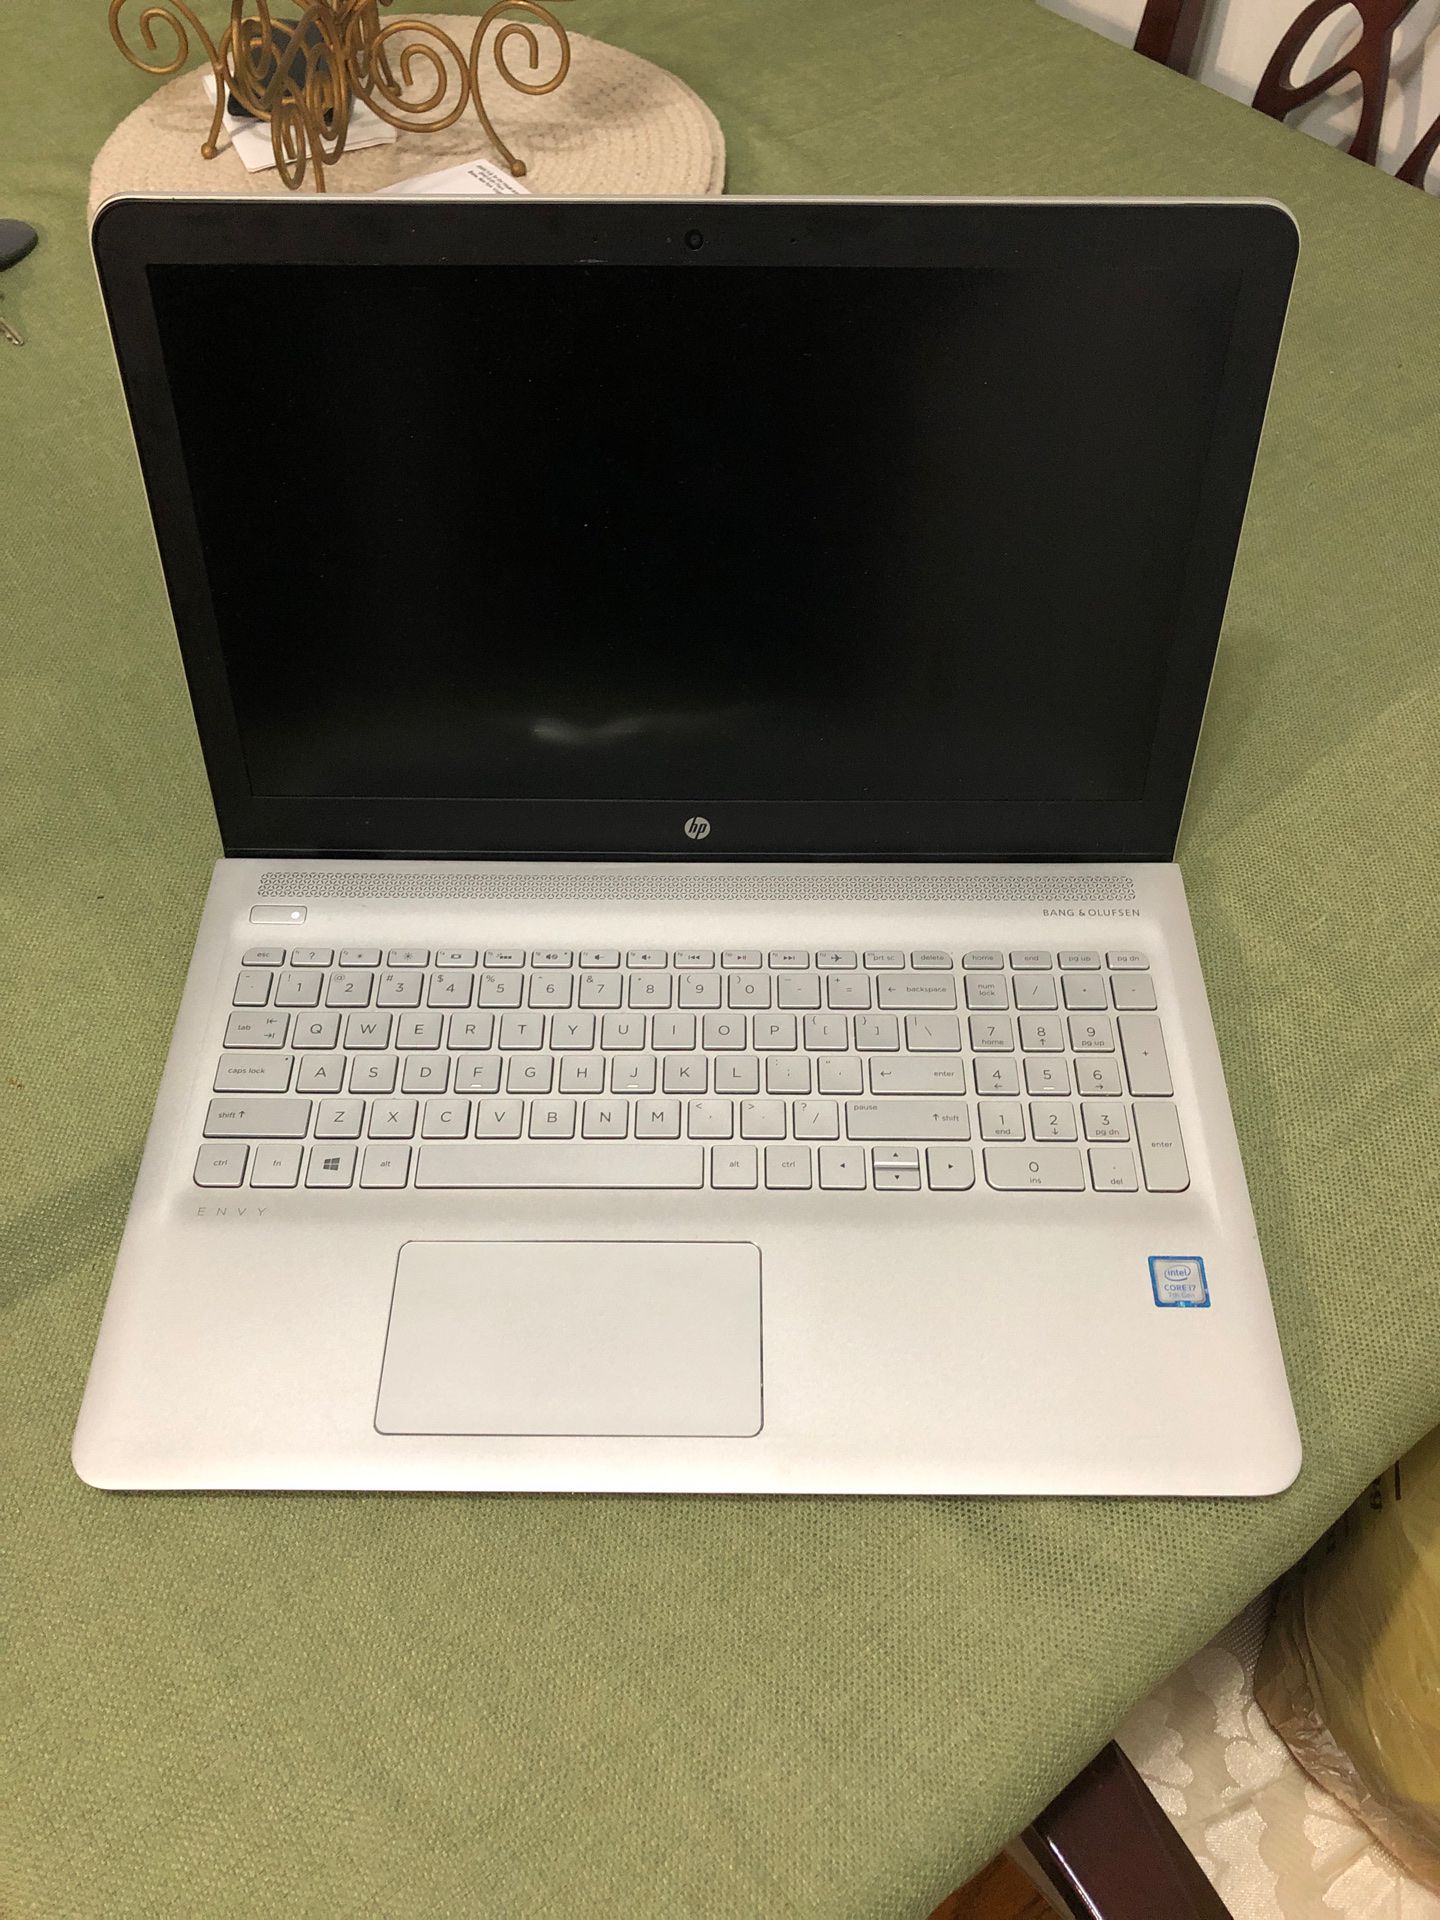 HP Envy Notebook, Bang & Olufsen, i7 processor, 16 GB Ram memory, 512 GB Solid State Drive